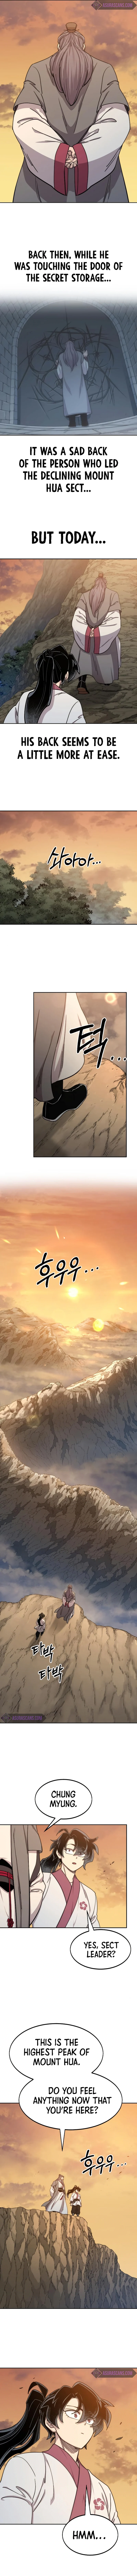 return of the mount hua sect chapter 70, return of the flowery mountain sect chapter 70, return of the blossoming blade chapter 70